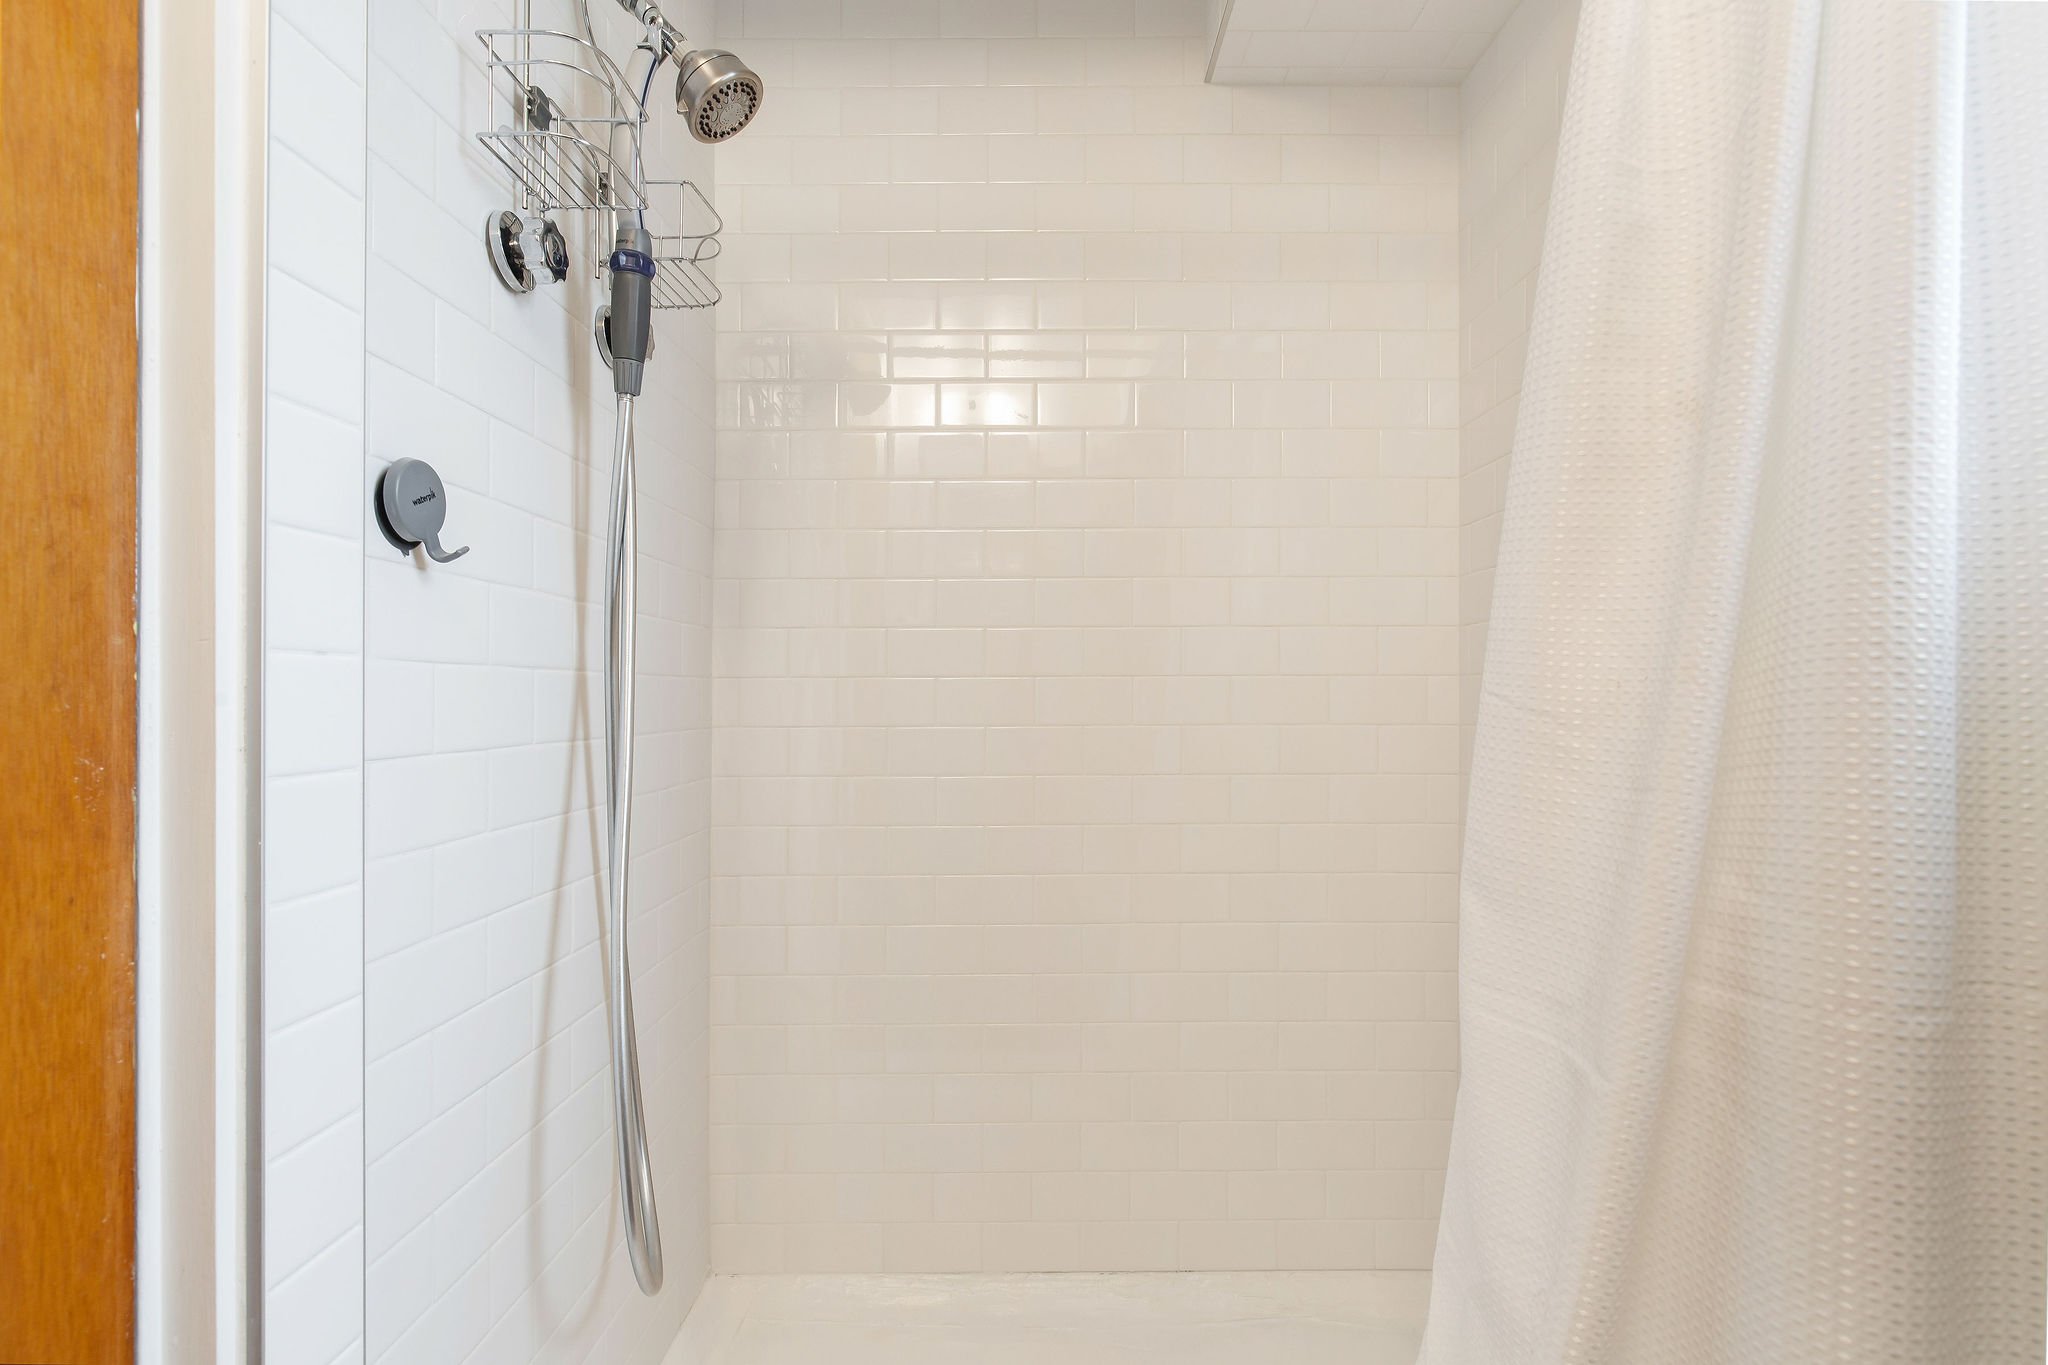  image description: interior of bathroom with tub and shower combo 